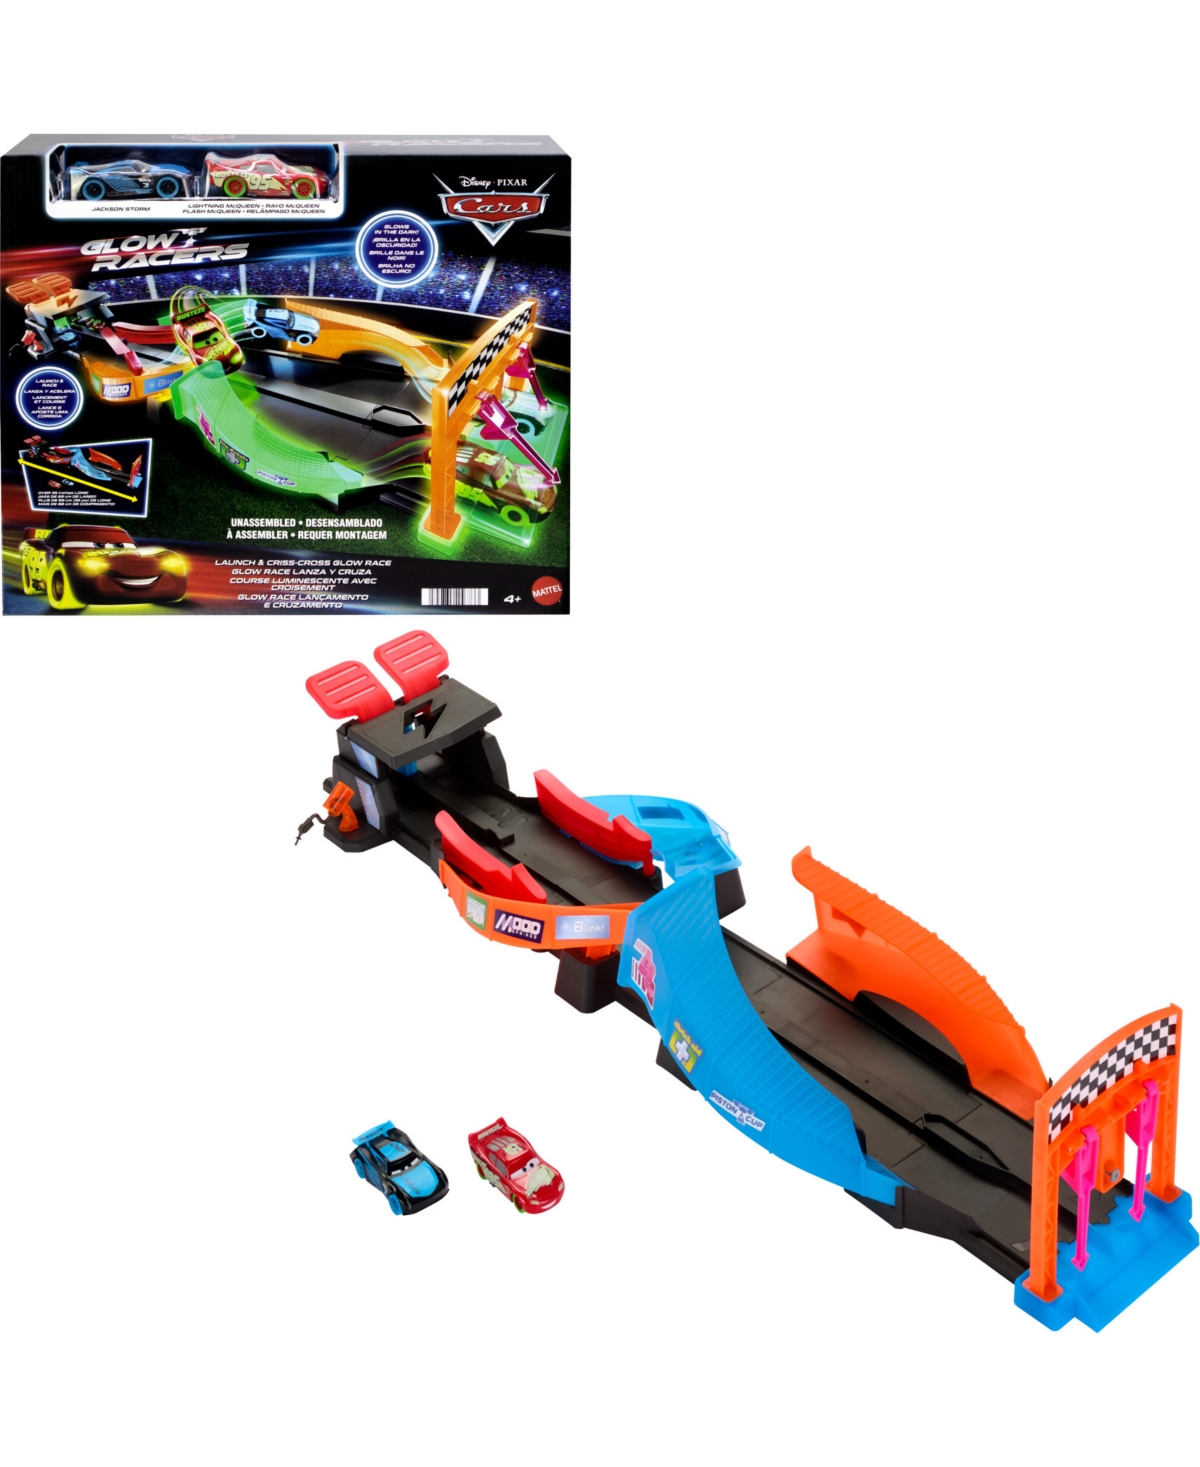 Cars Disney Pixar Glow Racers Launch Criss-cross Playset With 2 Glow-in-the-dark Vehicles In Multi-color